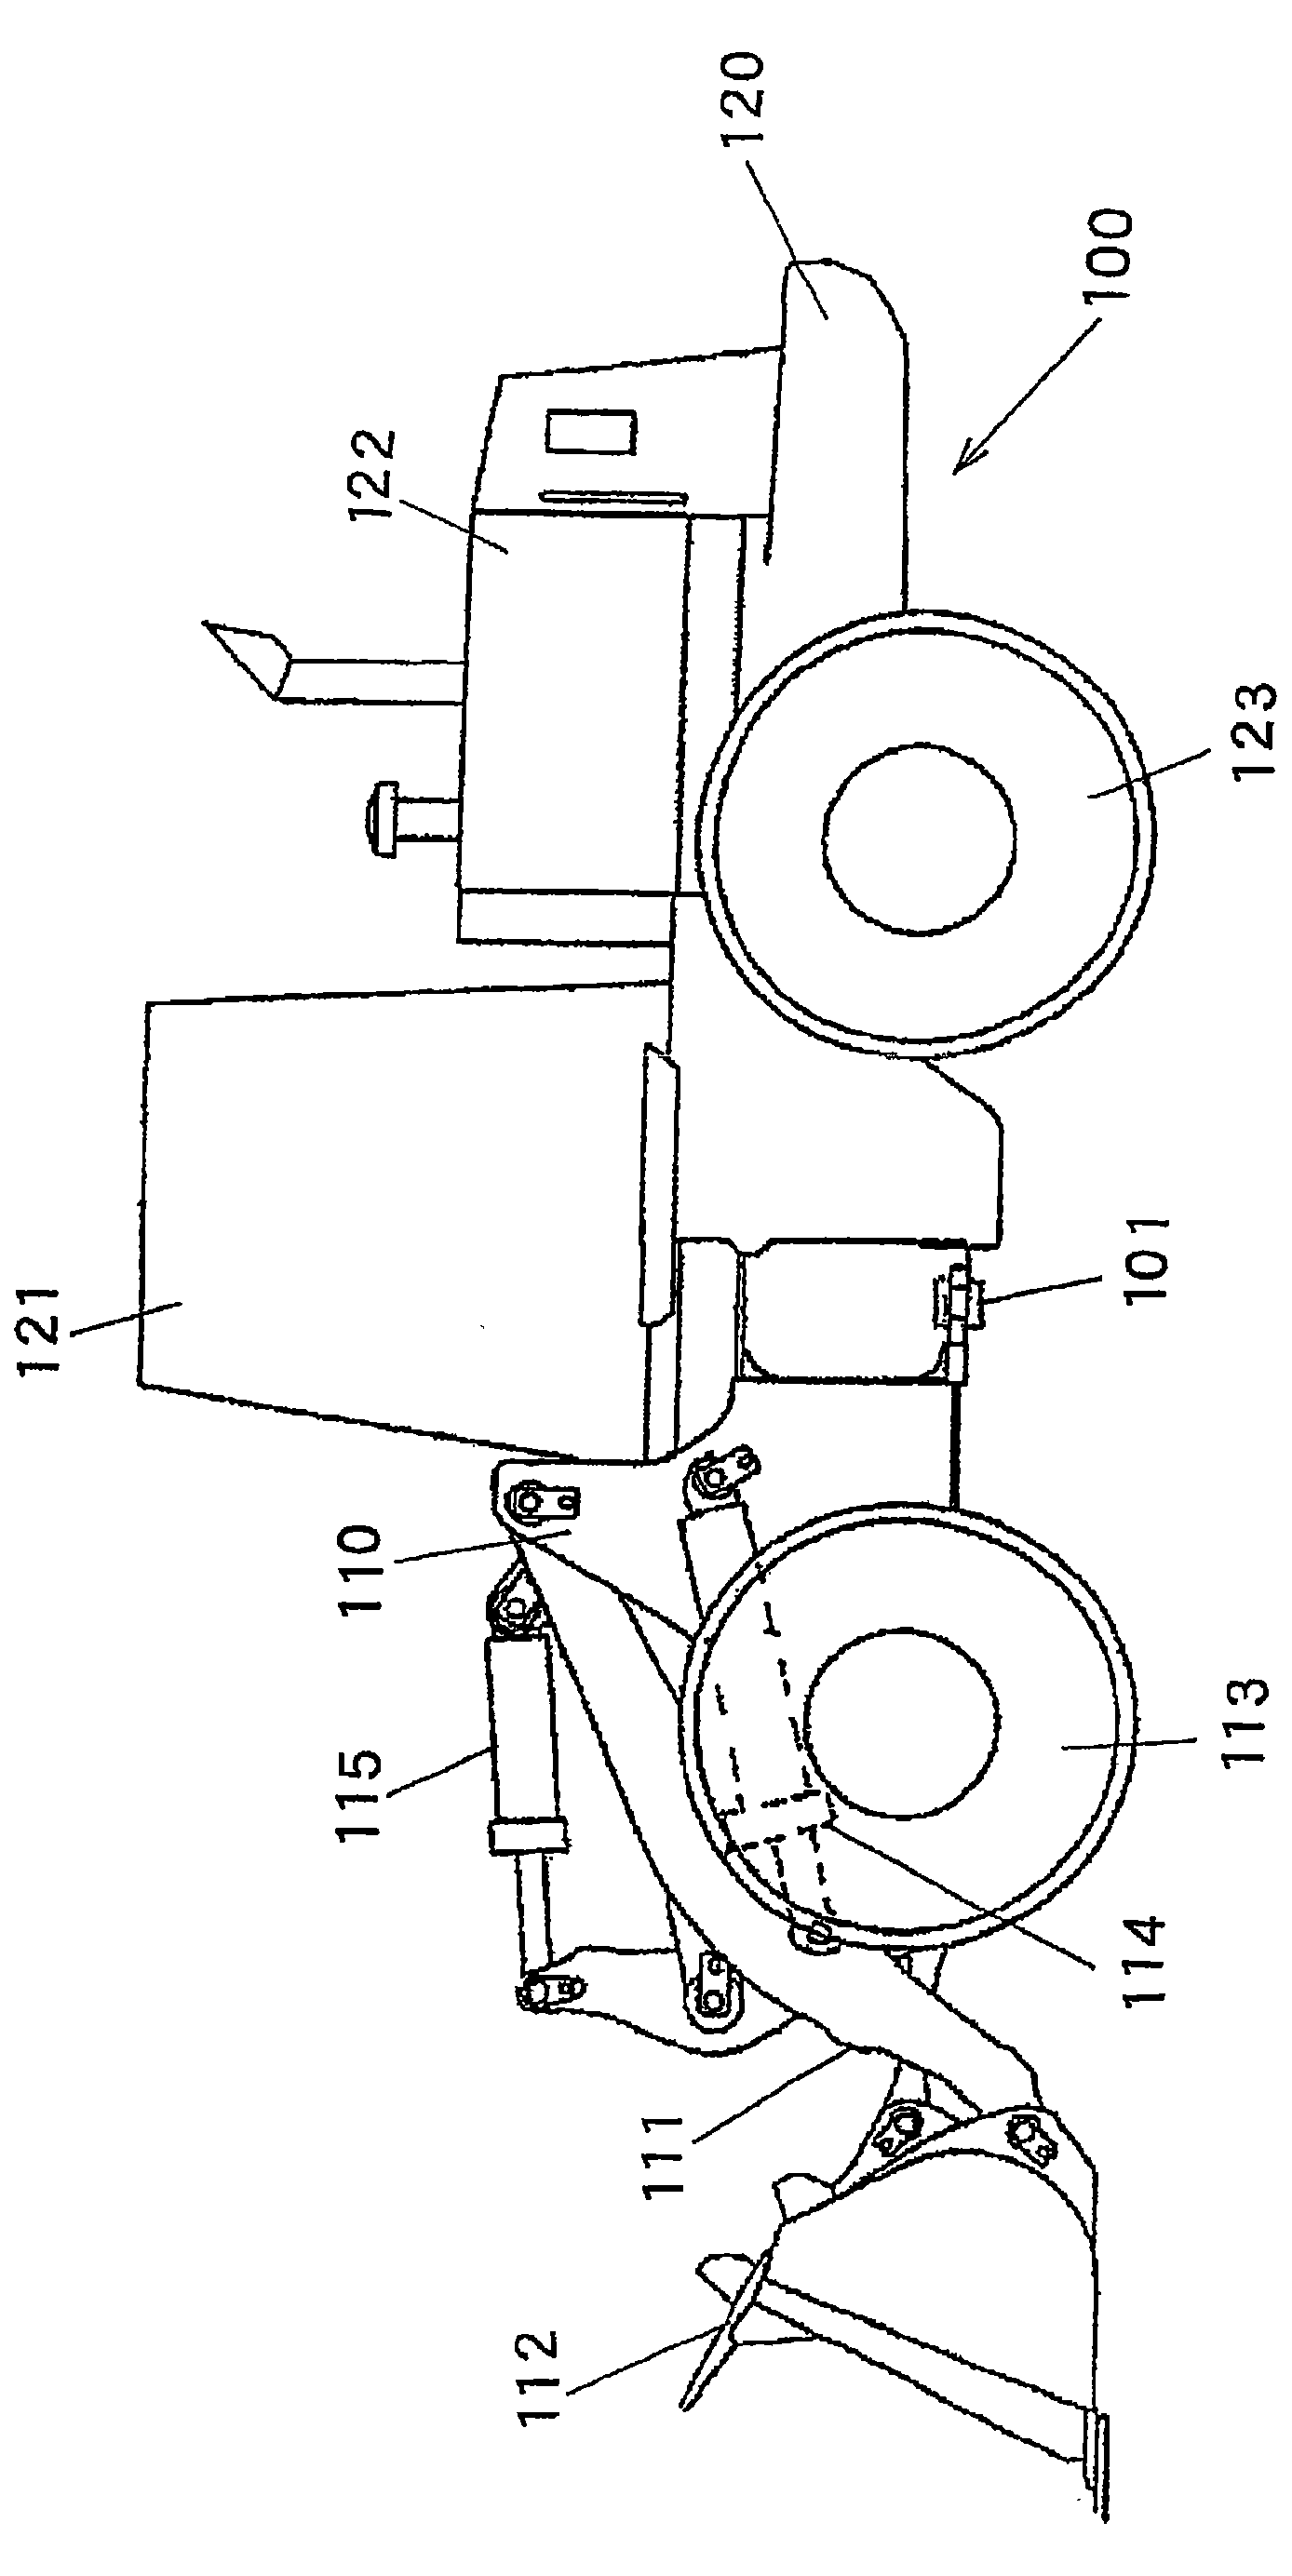 Control device for working vehicle